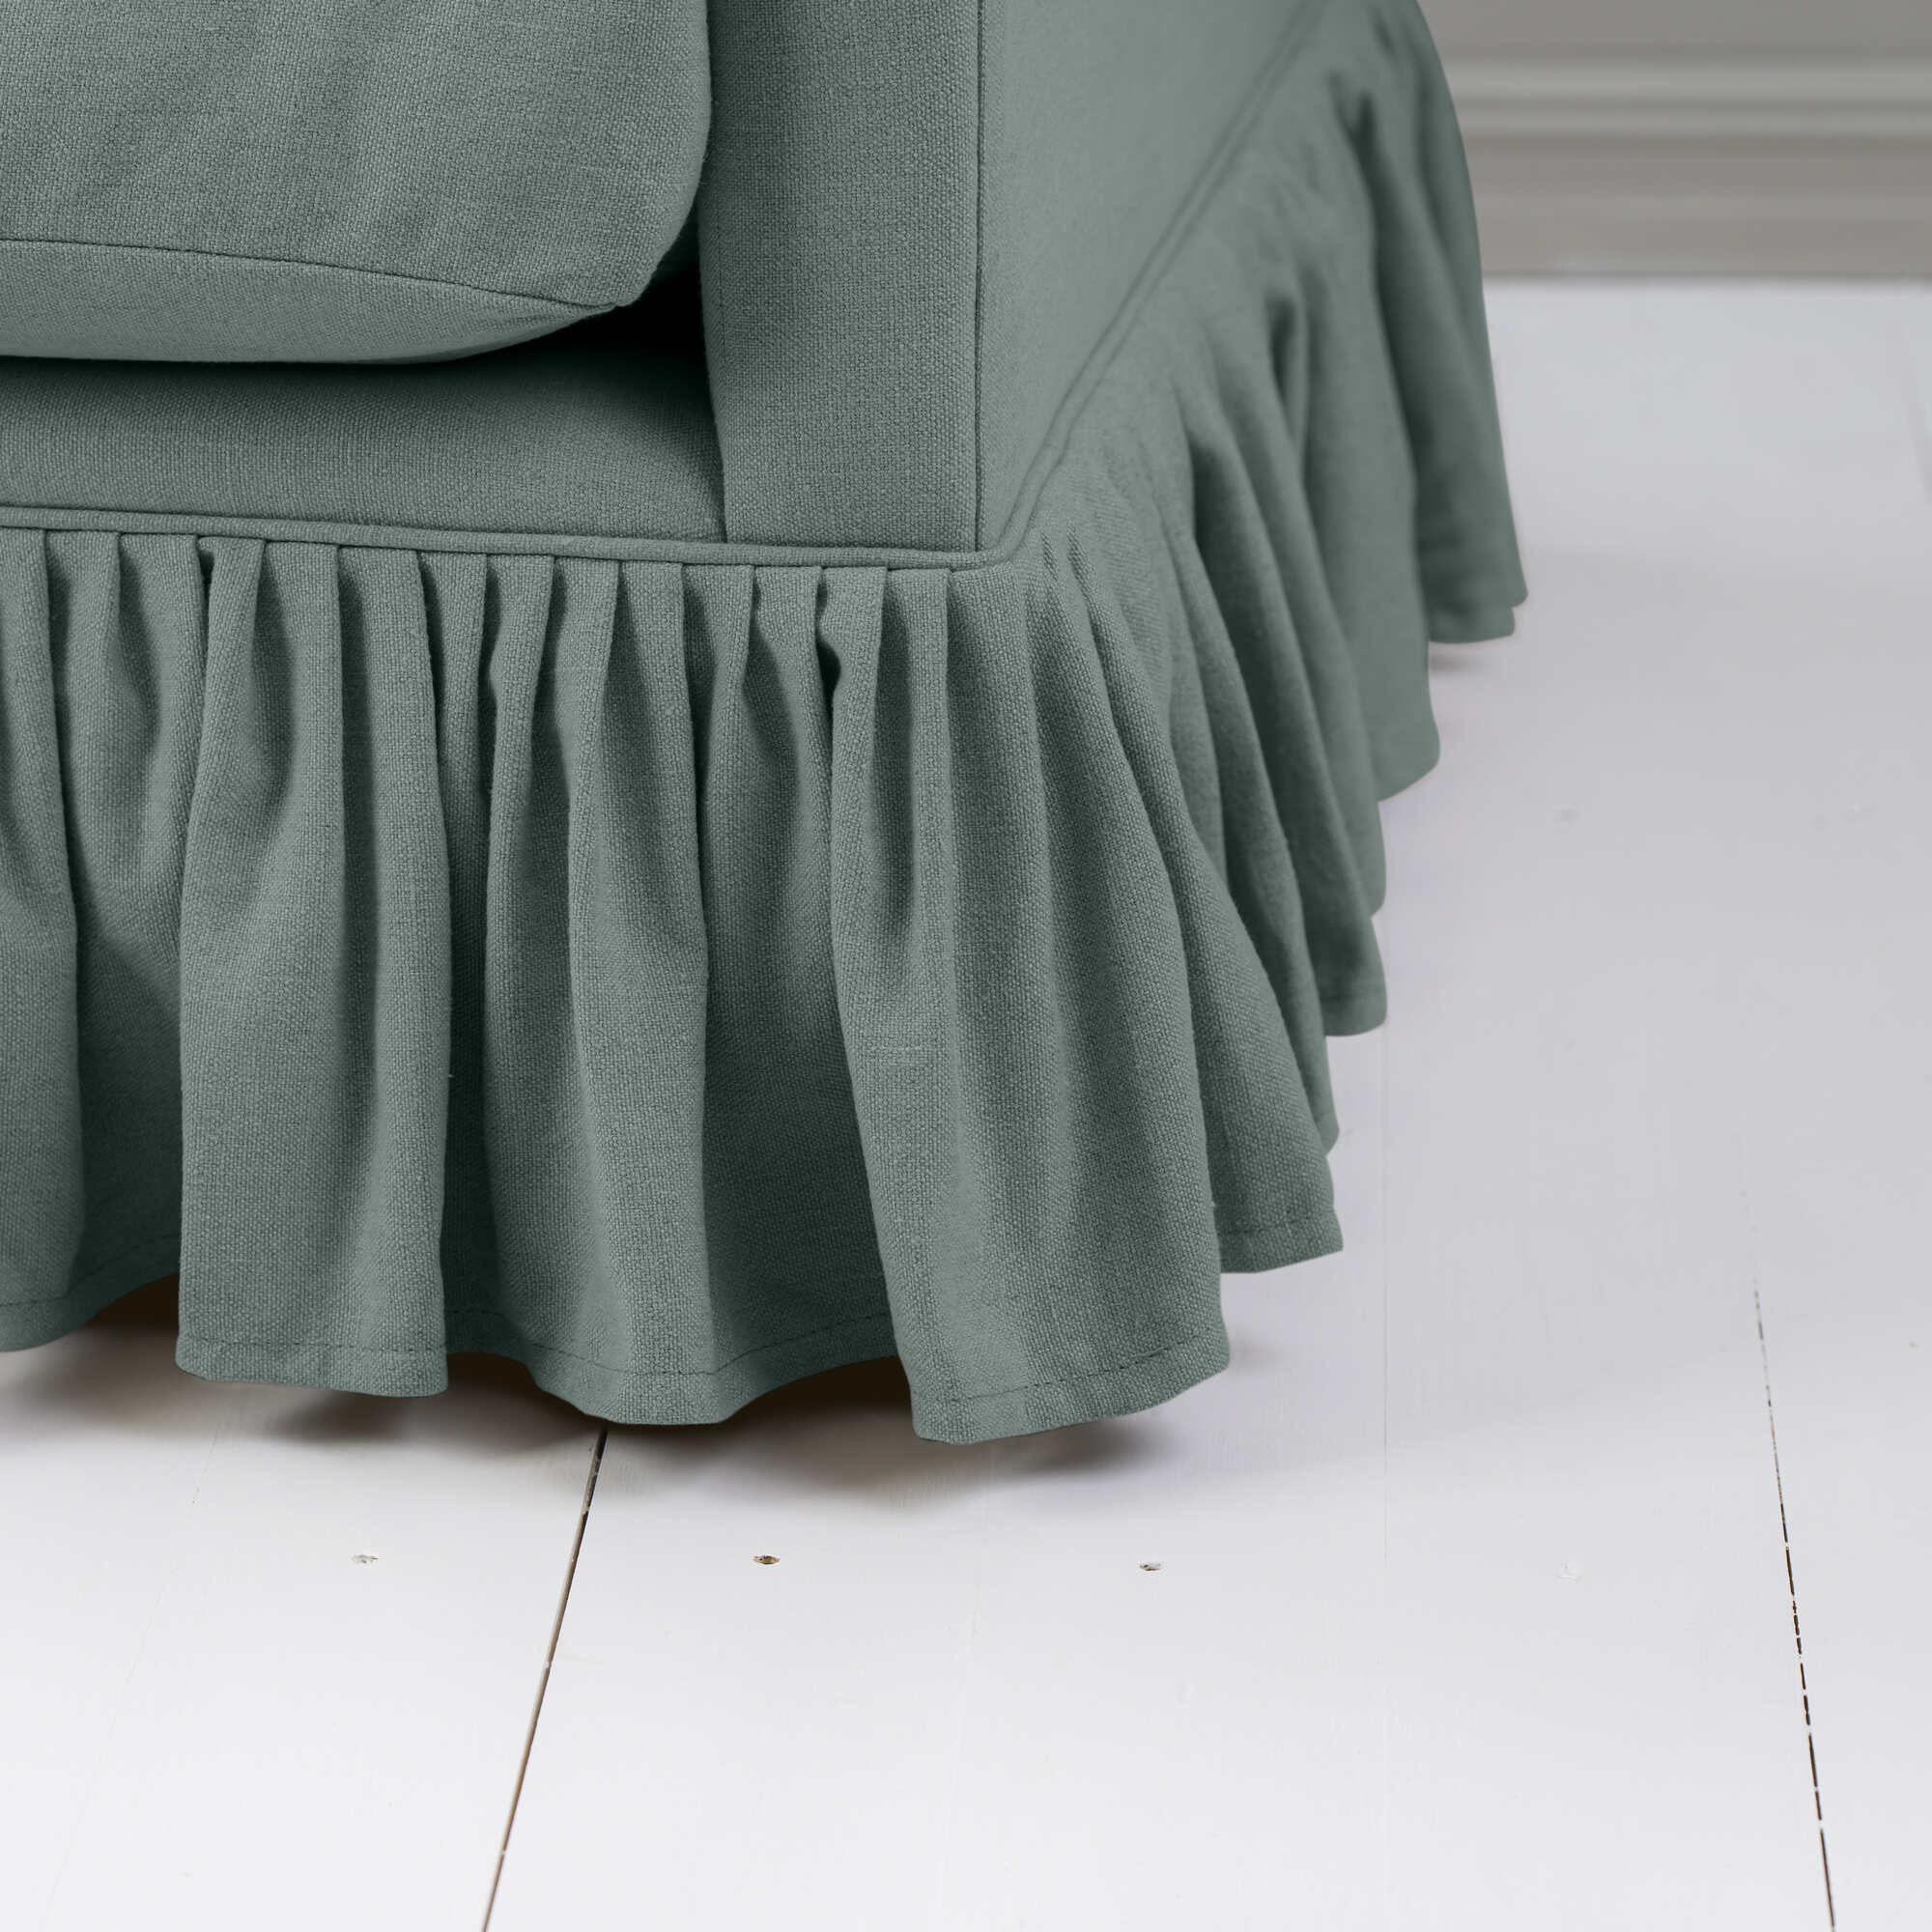 a close up of a ruffled couch